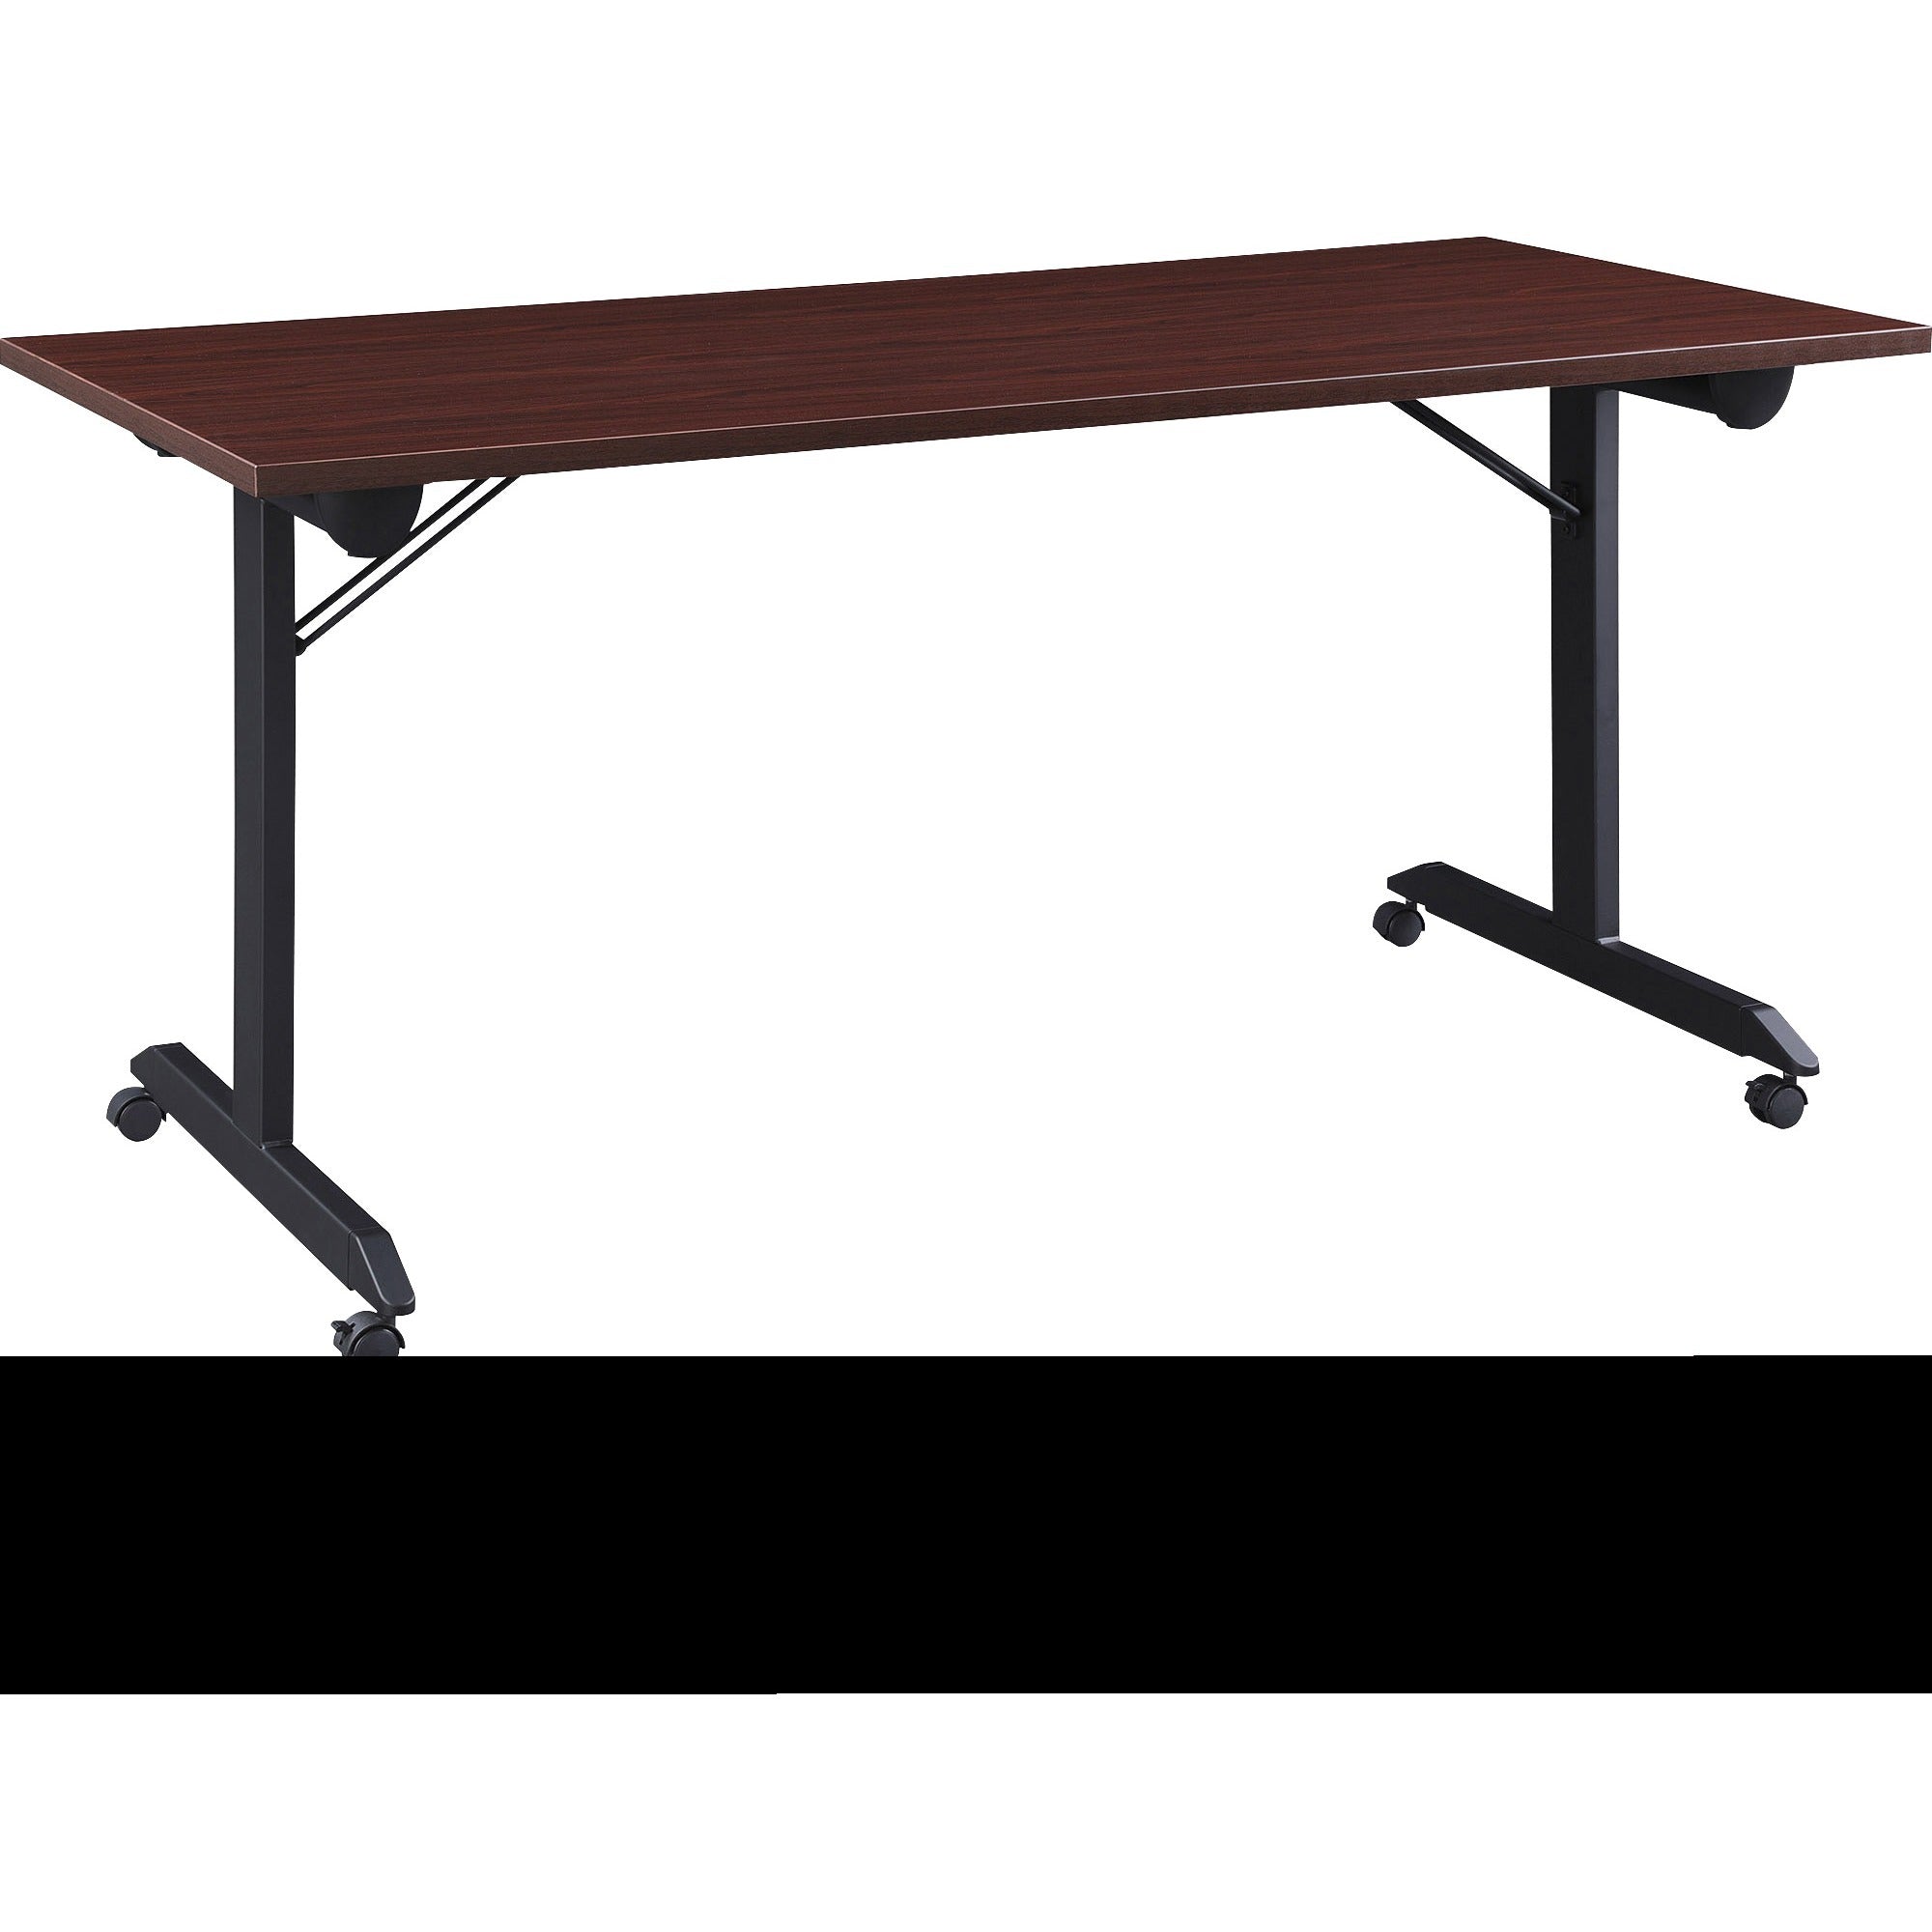 lorell-mobile-folding-training-table-for-table-toprectangle-top-powder-coated-base-200-lb-capacity-x-63-table-top-width-2950-height-x-63-width-x-2950-depth-assembly-required-brown-1-each_llr60740 - 1